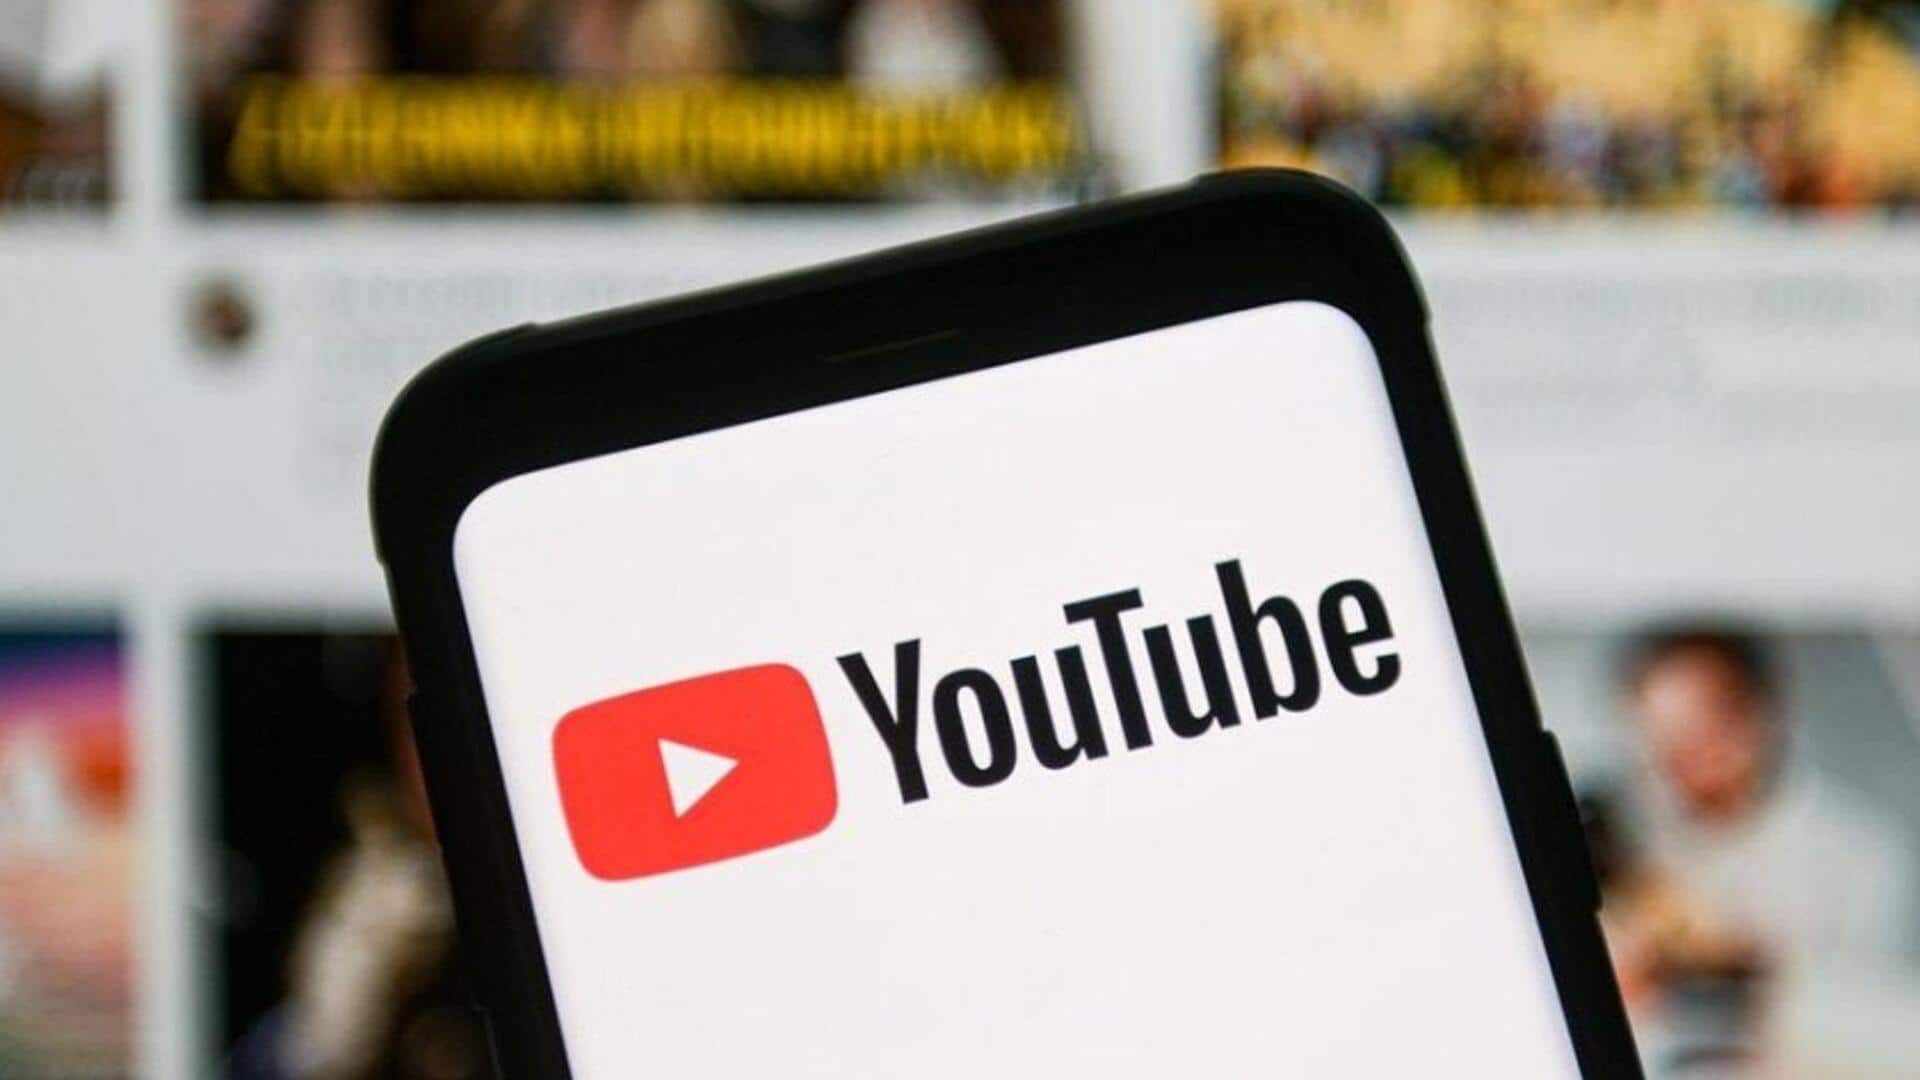 YouTube now lets users report their AI-generated deepfake videos